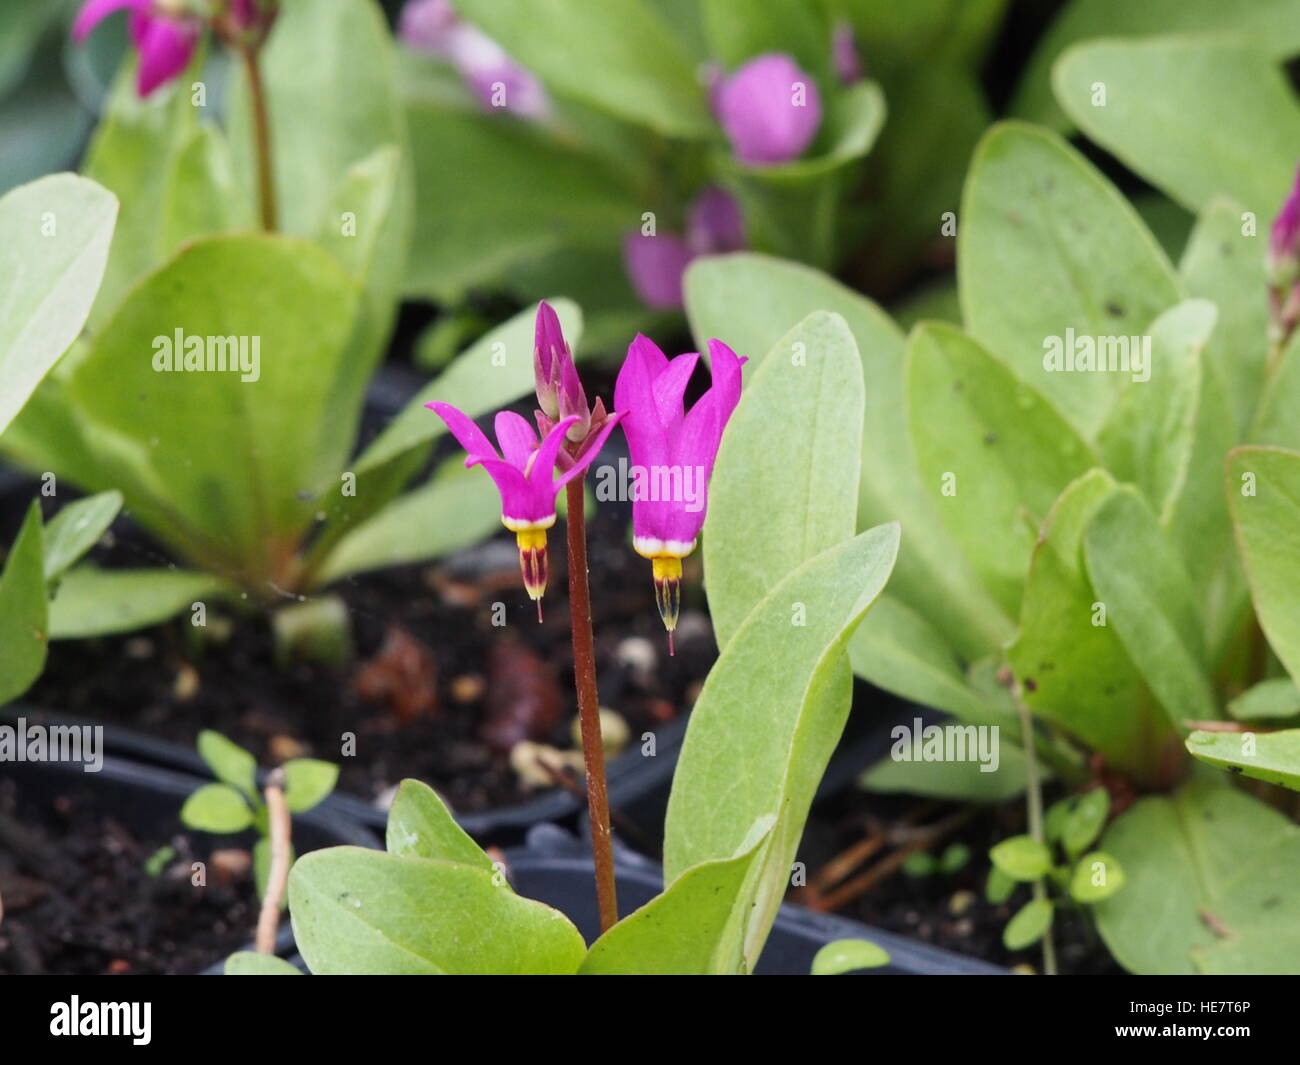 Dodecatheon meadia in full bloom Stock Photo